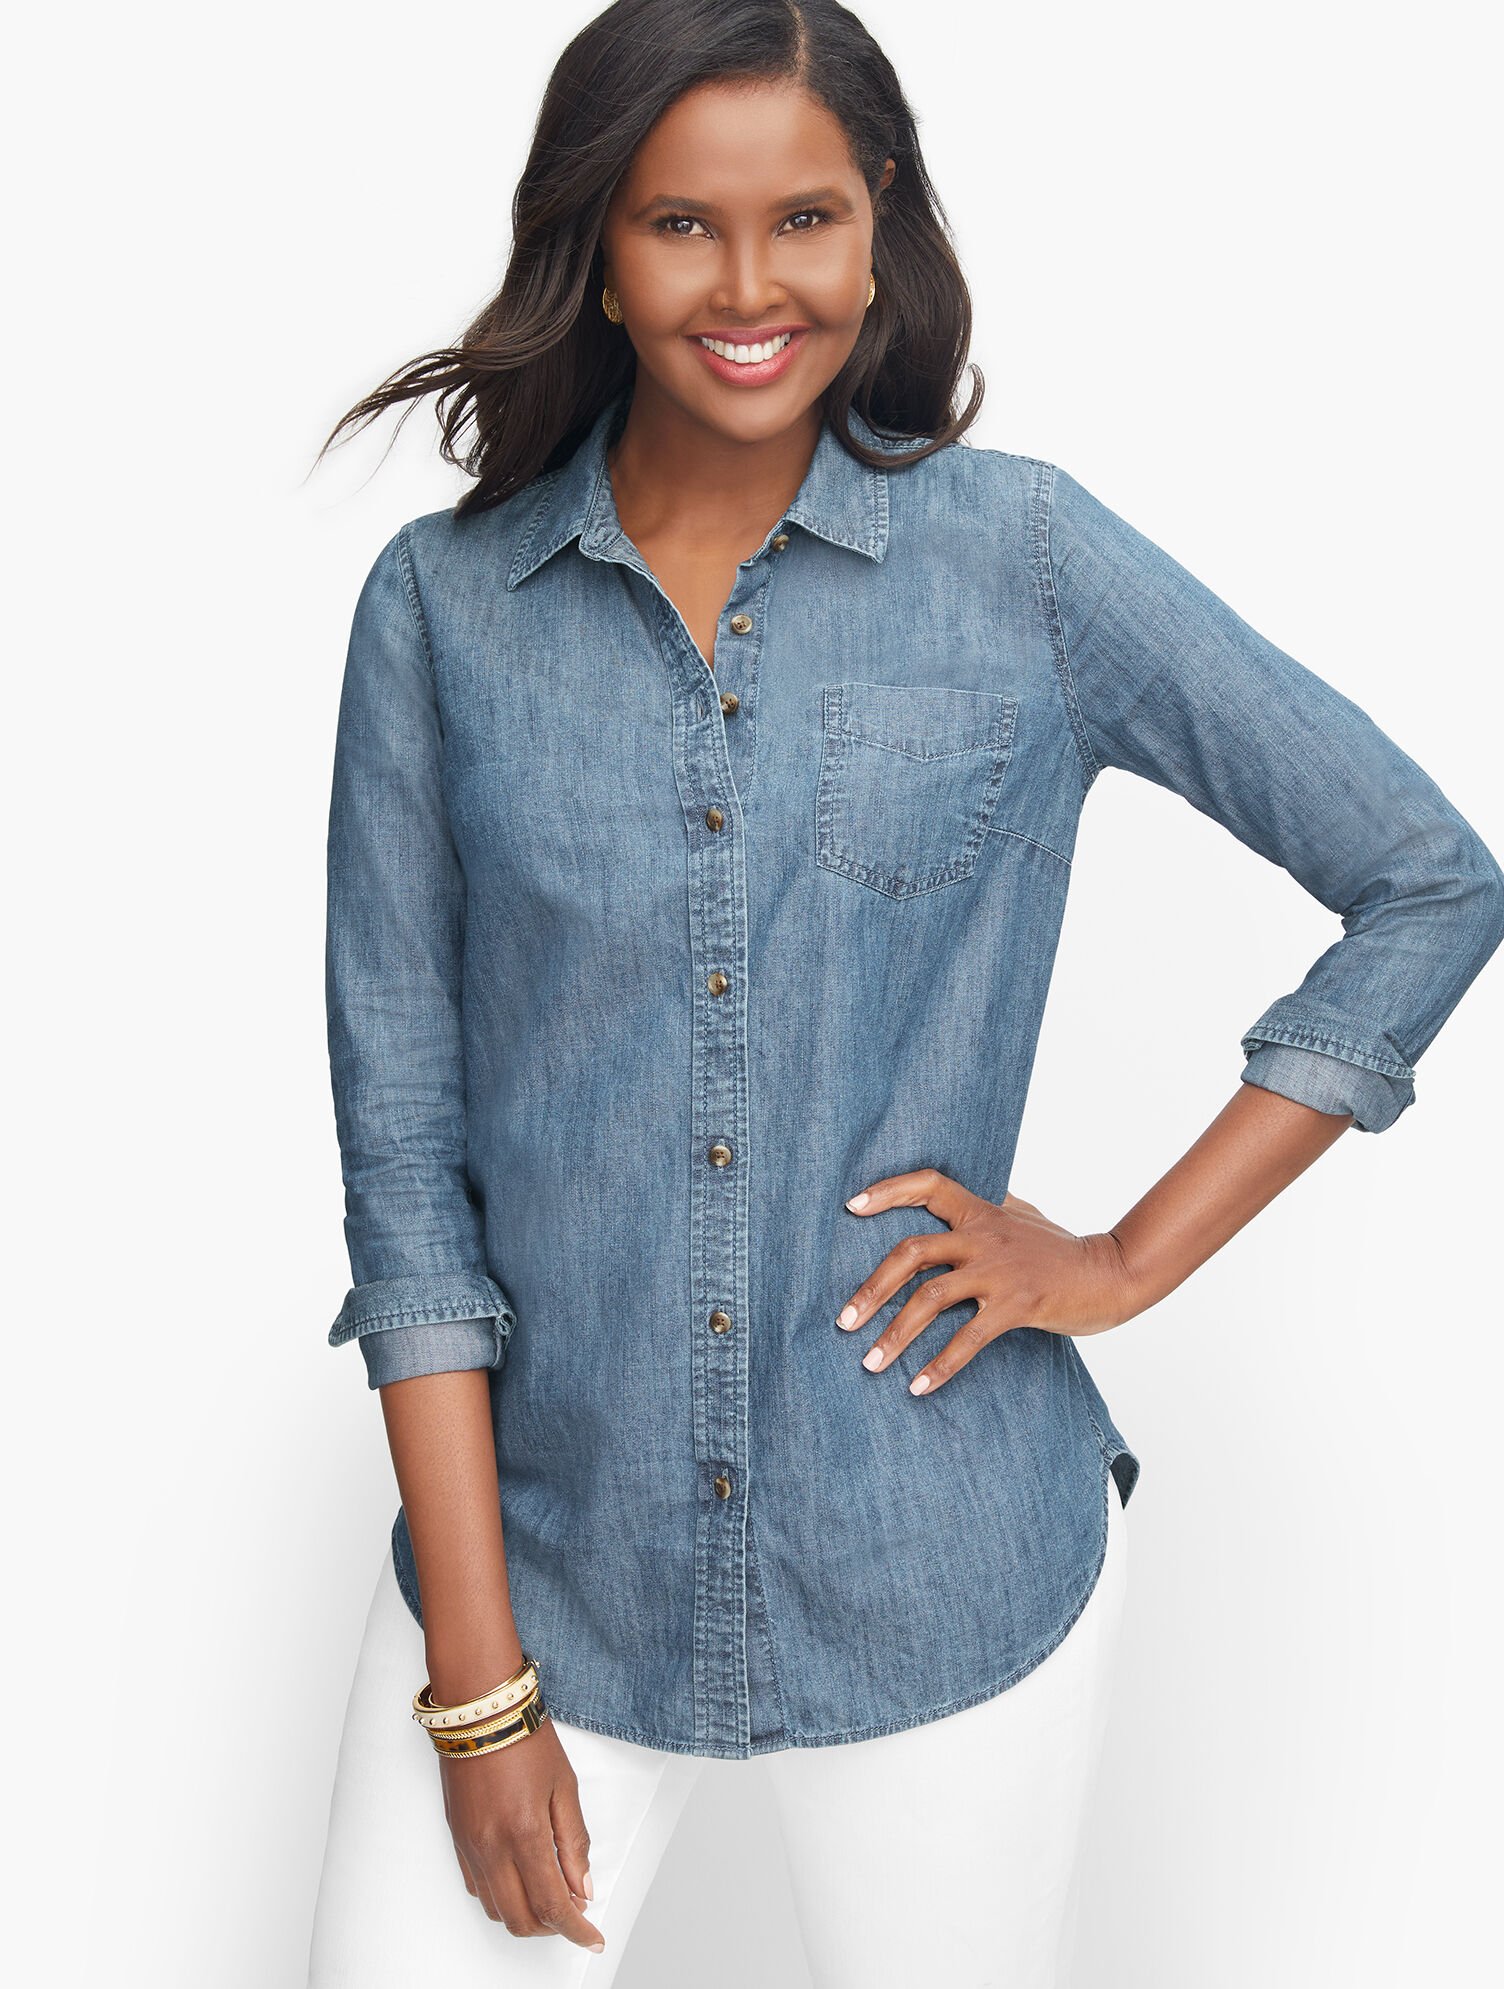 Talbots  Designer jeans for women, Clothing catalog, Clothes for women